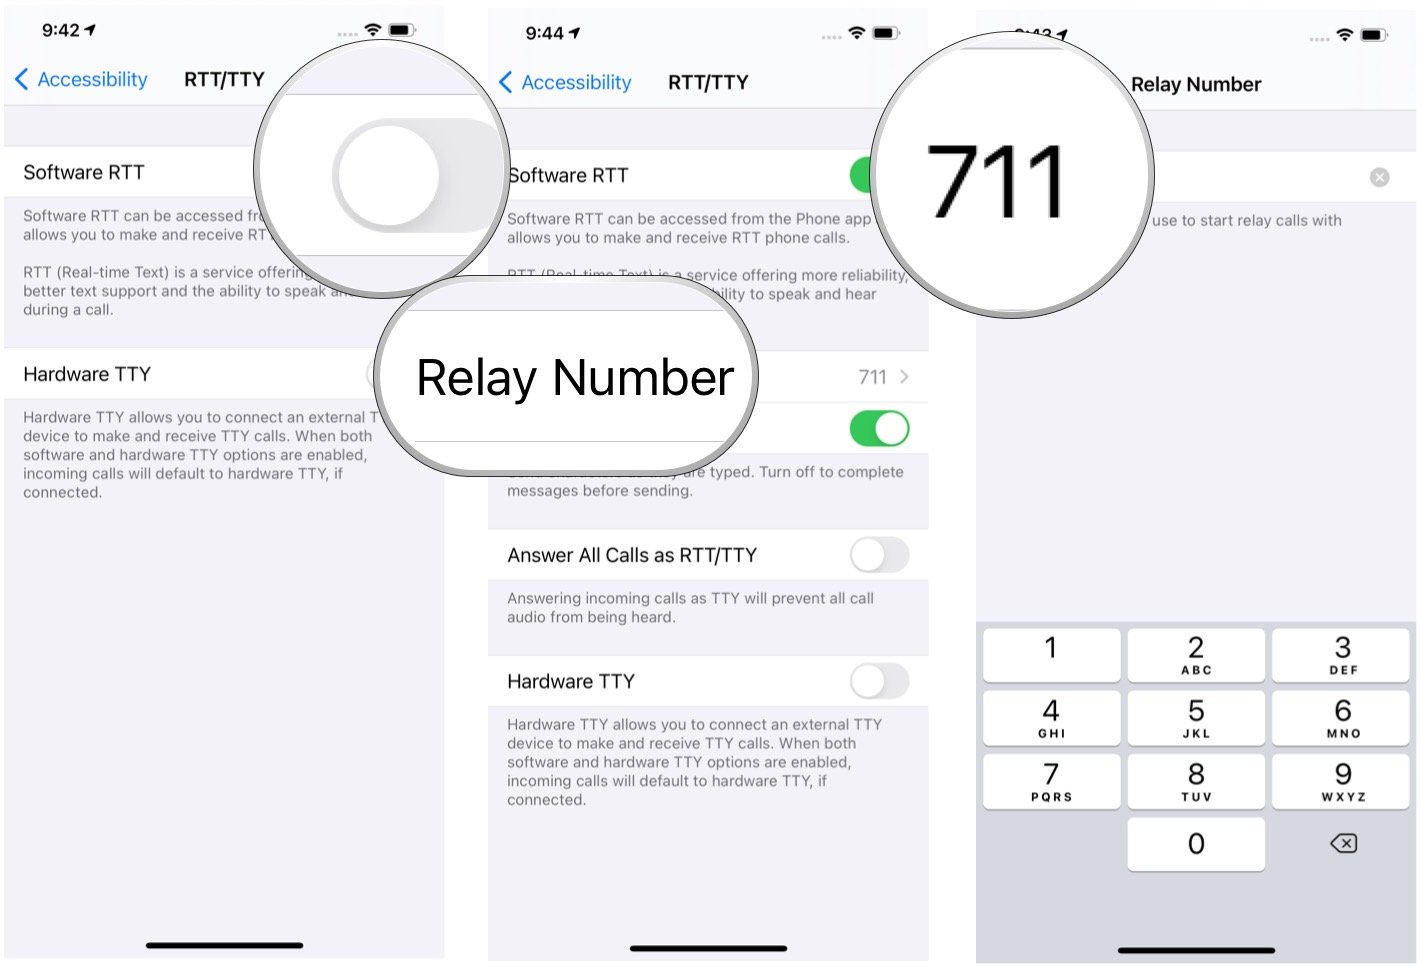 To set up RTT on iPhone, toggle on Software RTT, tap the Relay Number and enter the phone number for TTY relay calls. Choose the back button.